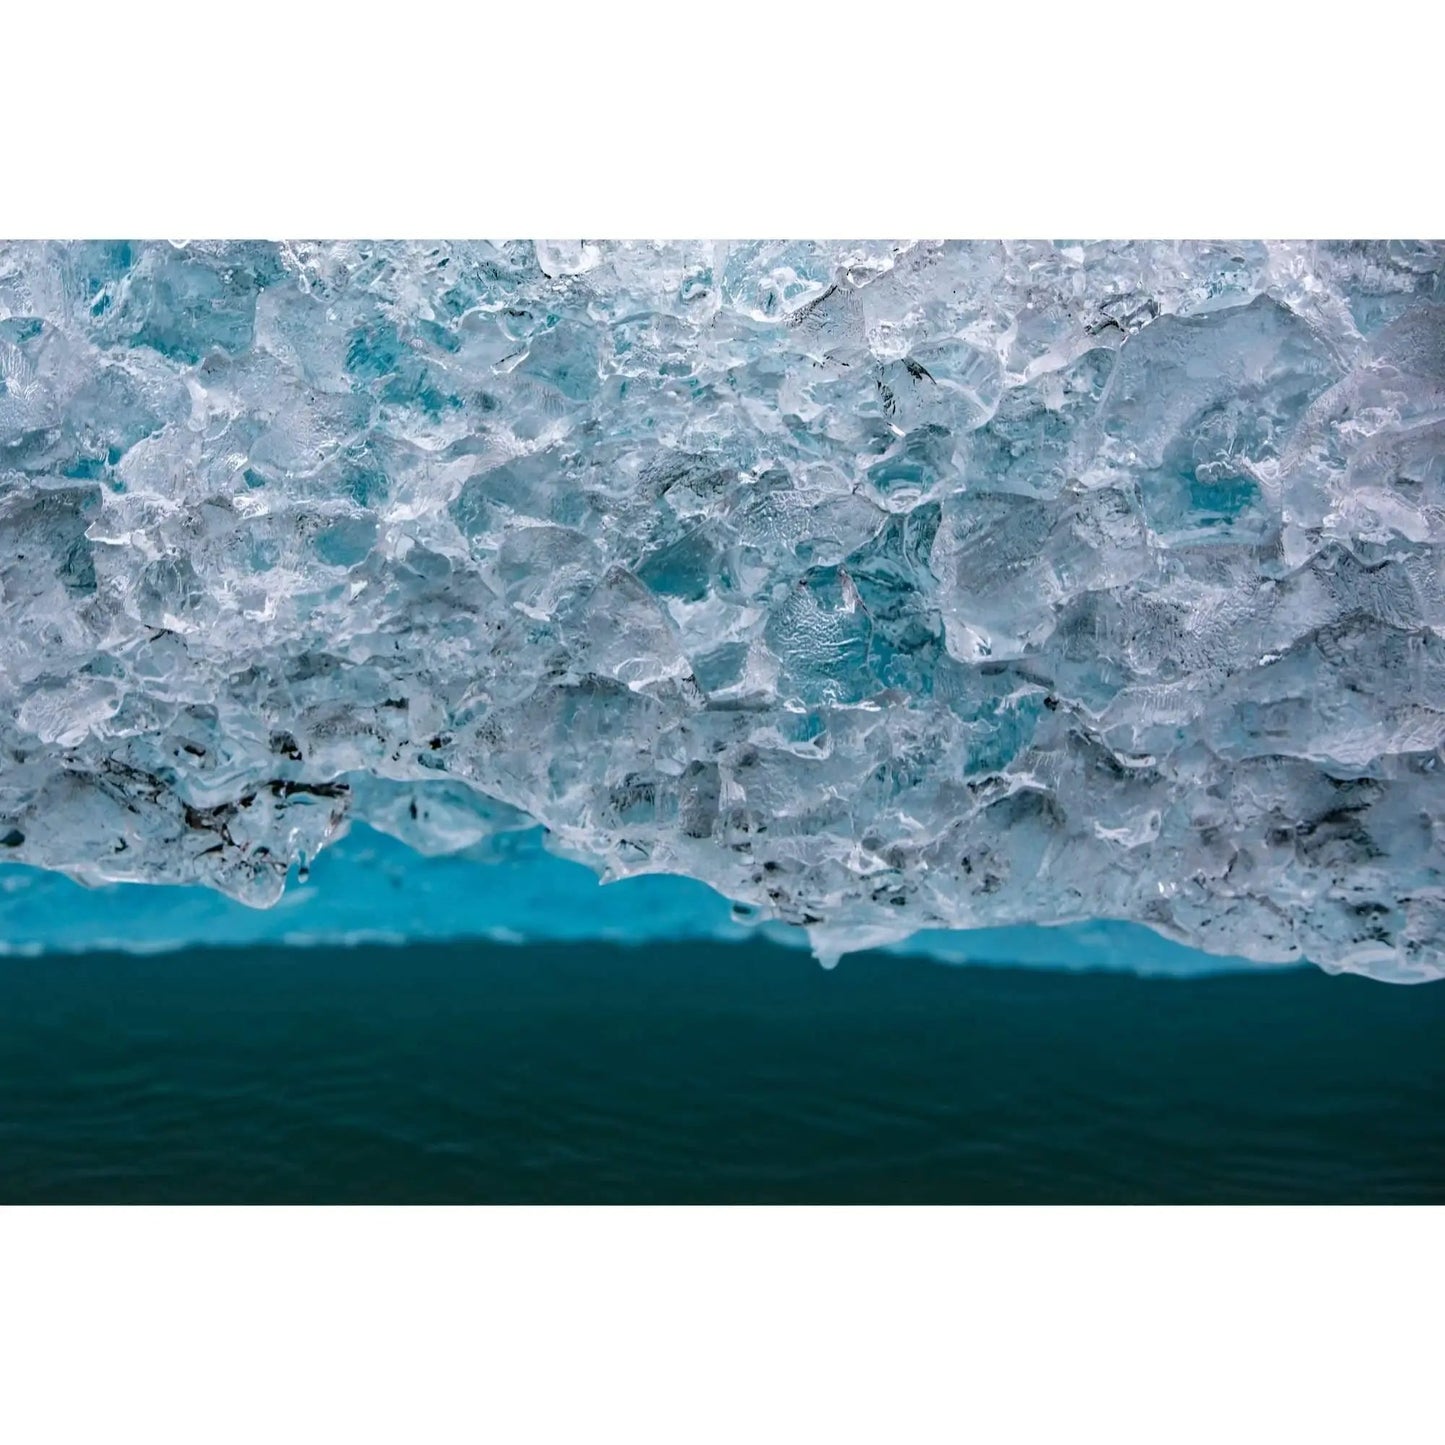 Elongated art of cold iceberg in spencer lake Alaska featuring detailed ice crystals and teal water